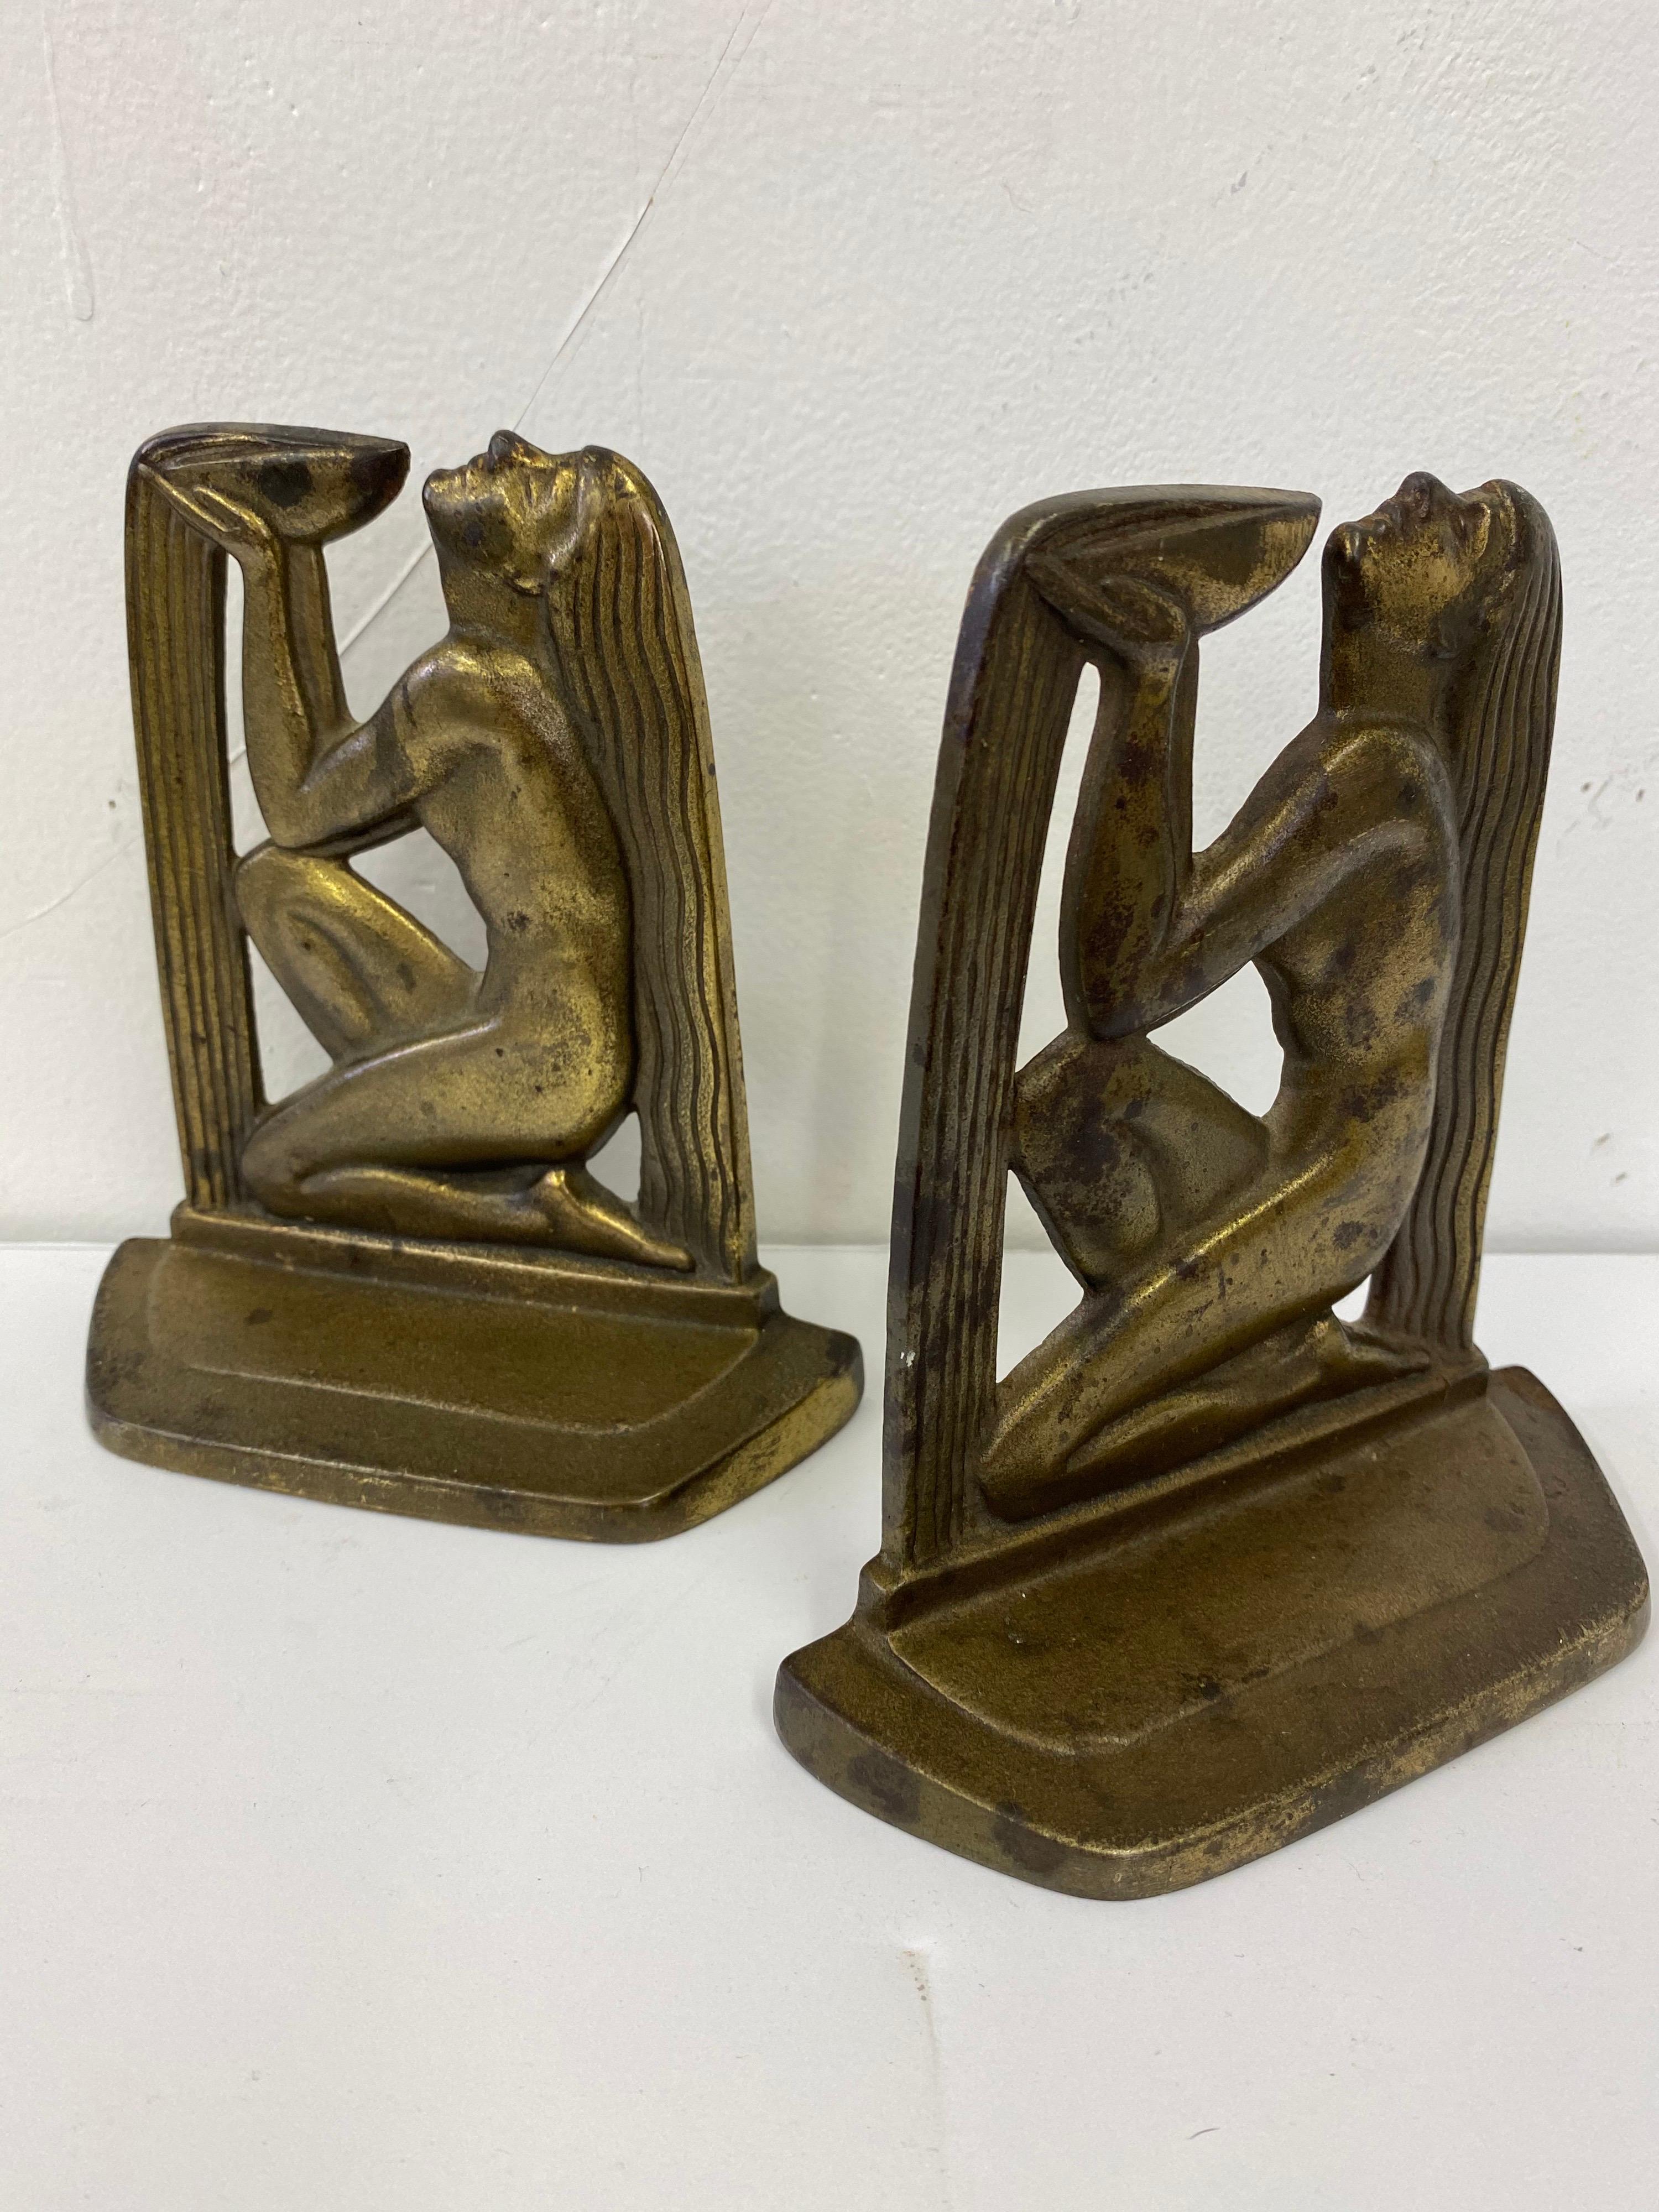 The well of wisdom iron bookends. Dated 1929 with a brass or bronze patina. All original and in good shape! Everyone needs a little wisdom!